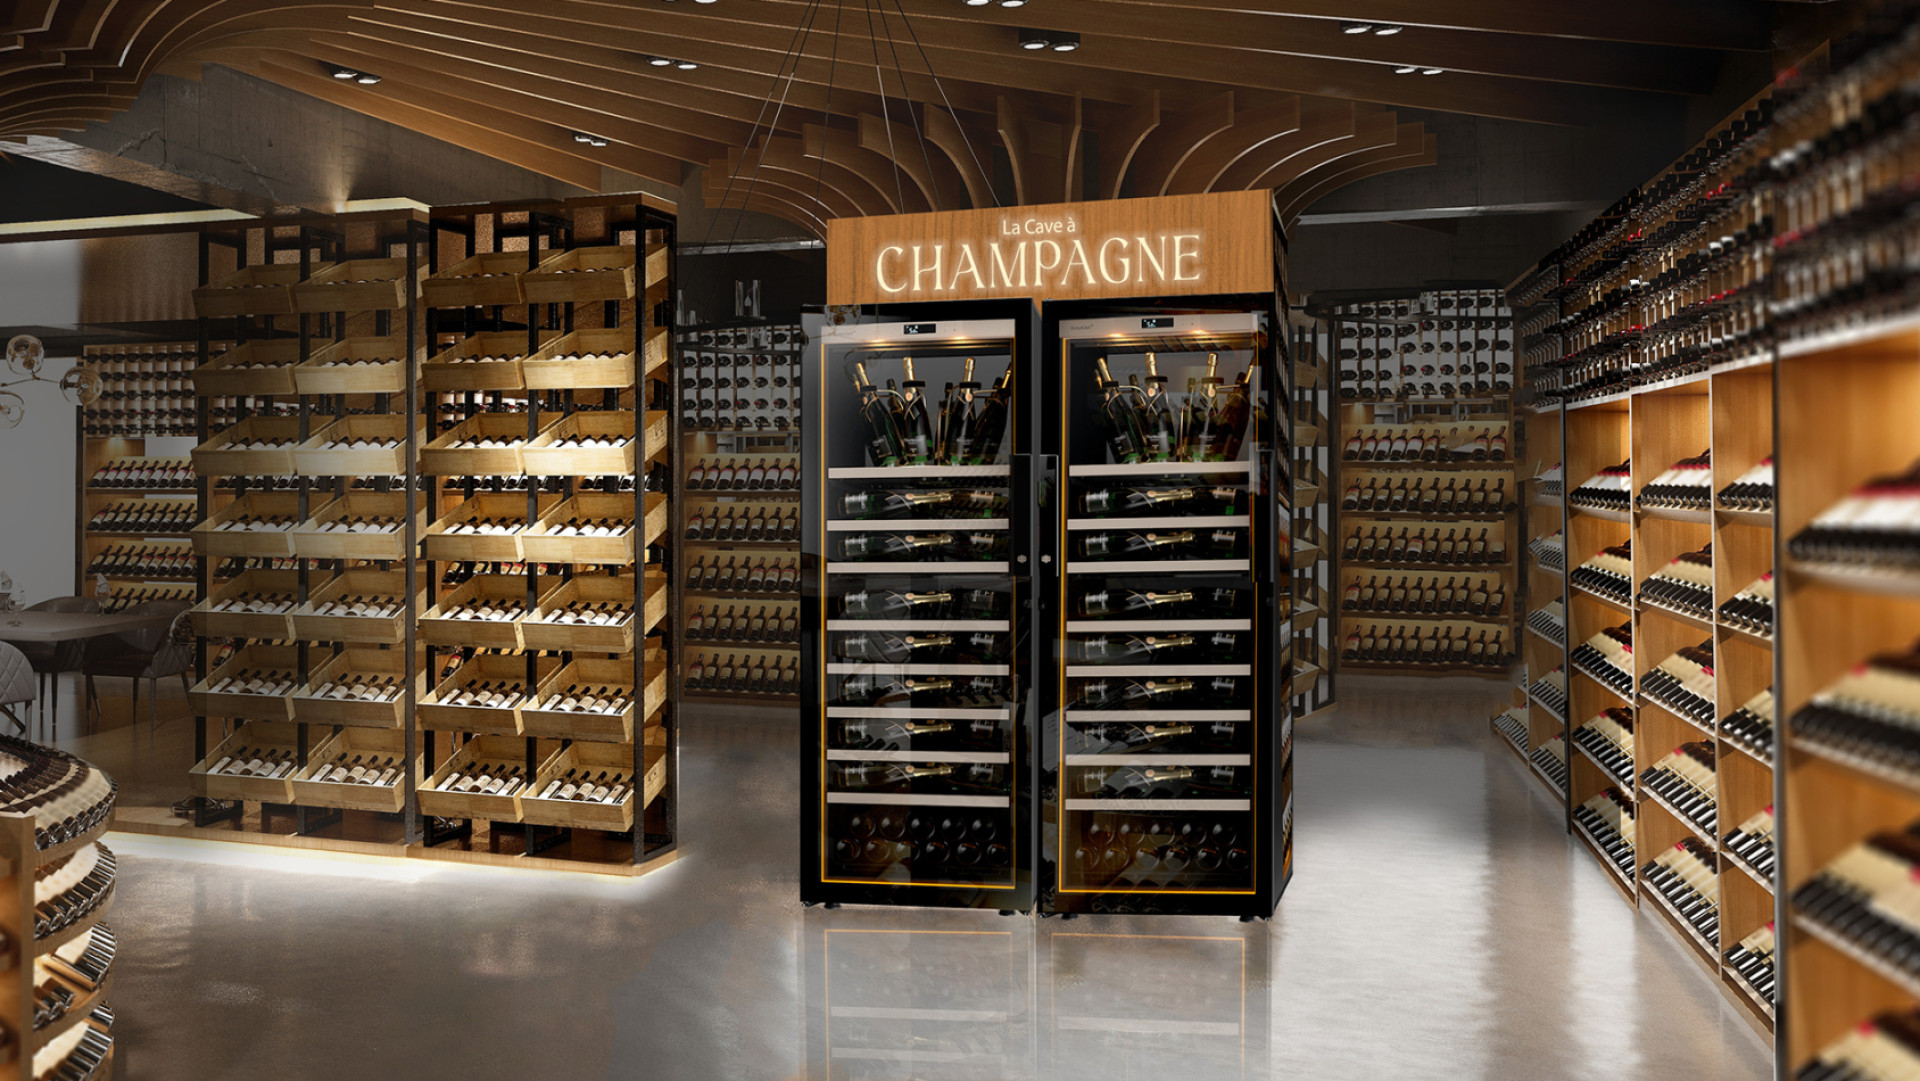 Attract more customers to the store and increase your sales with an attractive refrigerated wine display. Here is a wine cooler corner specially dedicated to the presentation of champagnes and bringing them to tasting temperature.